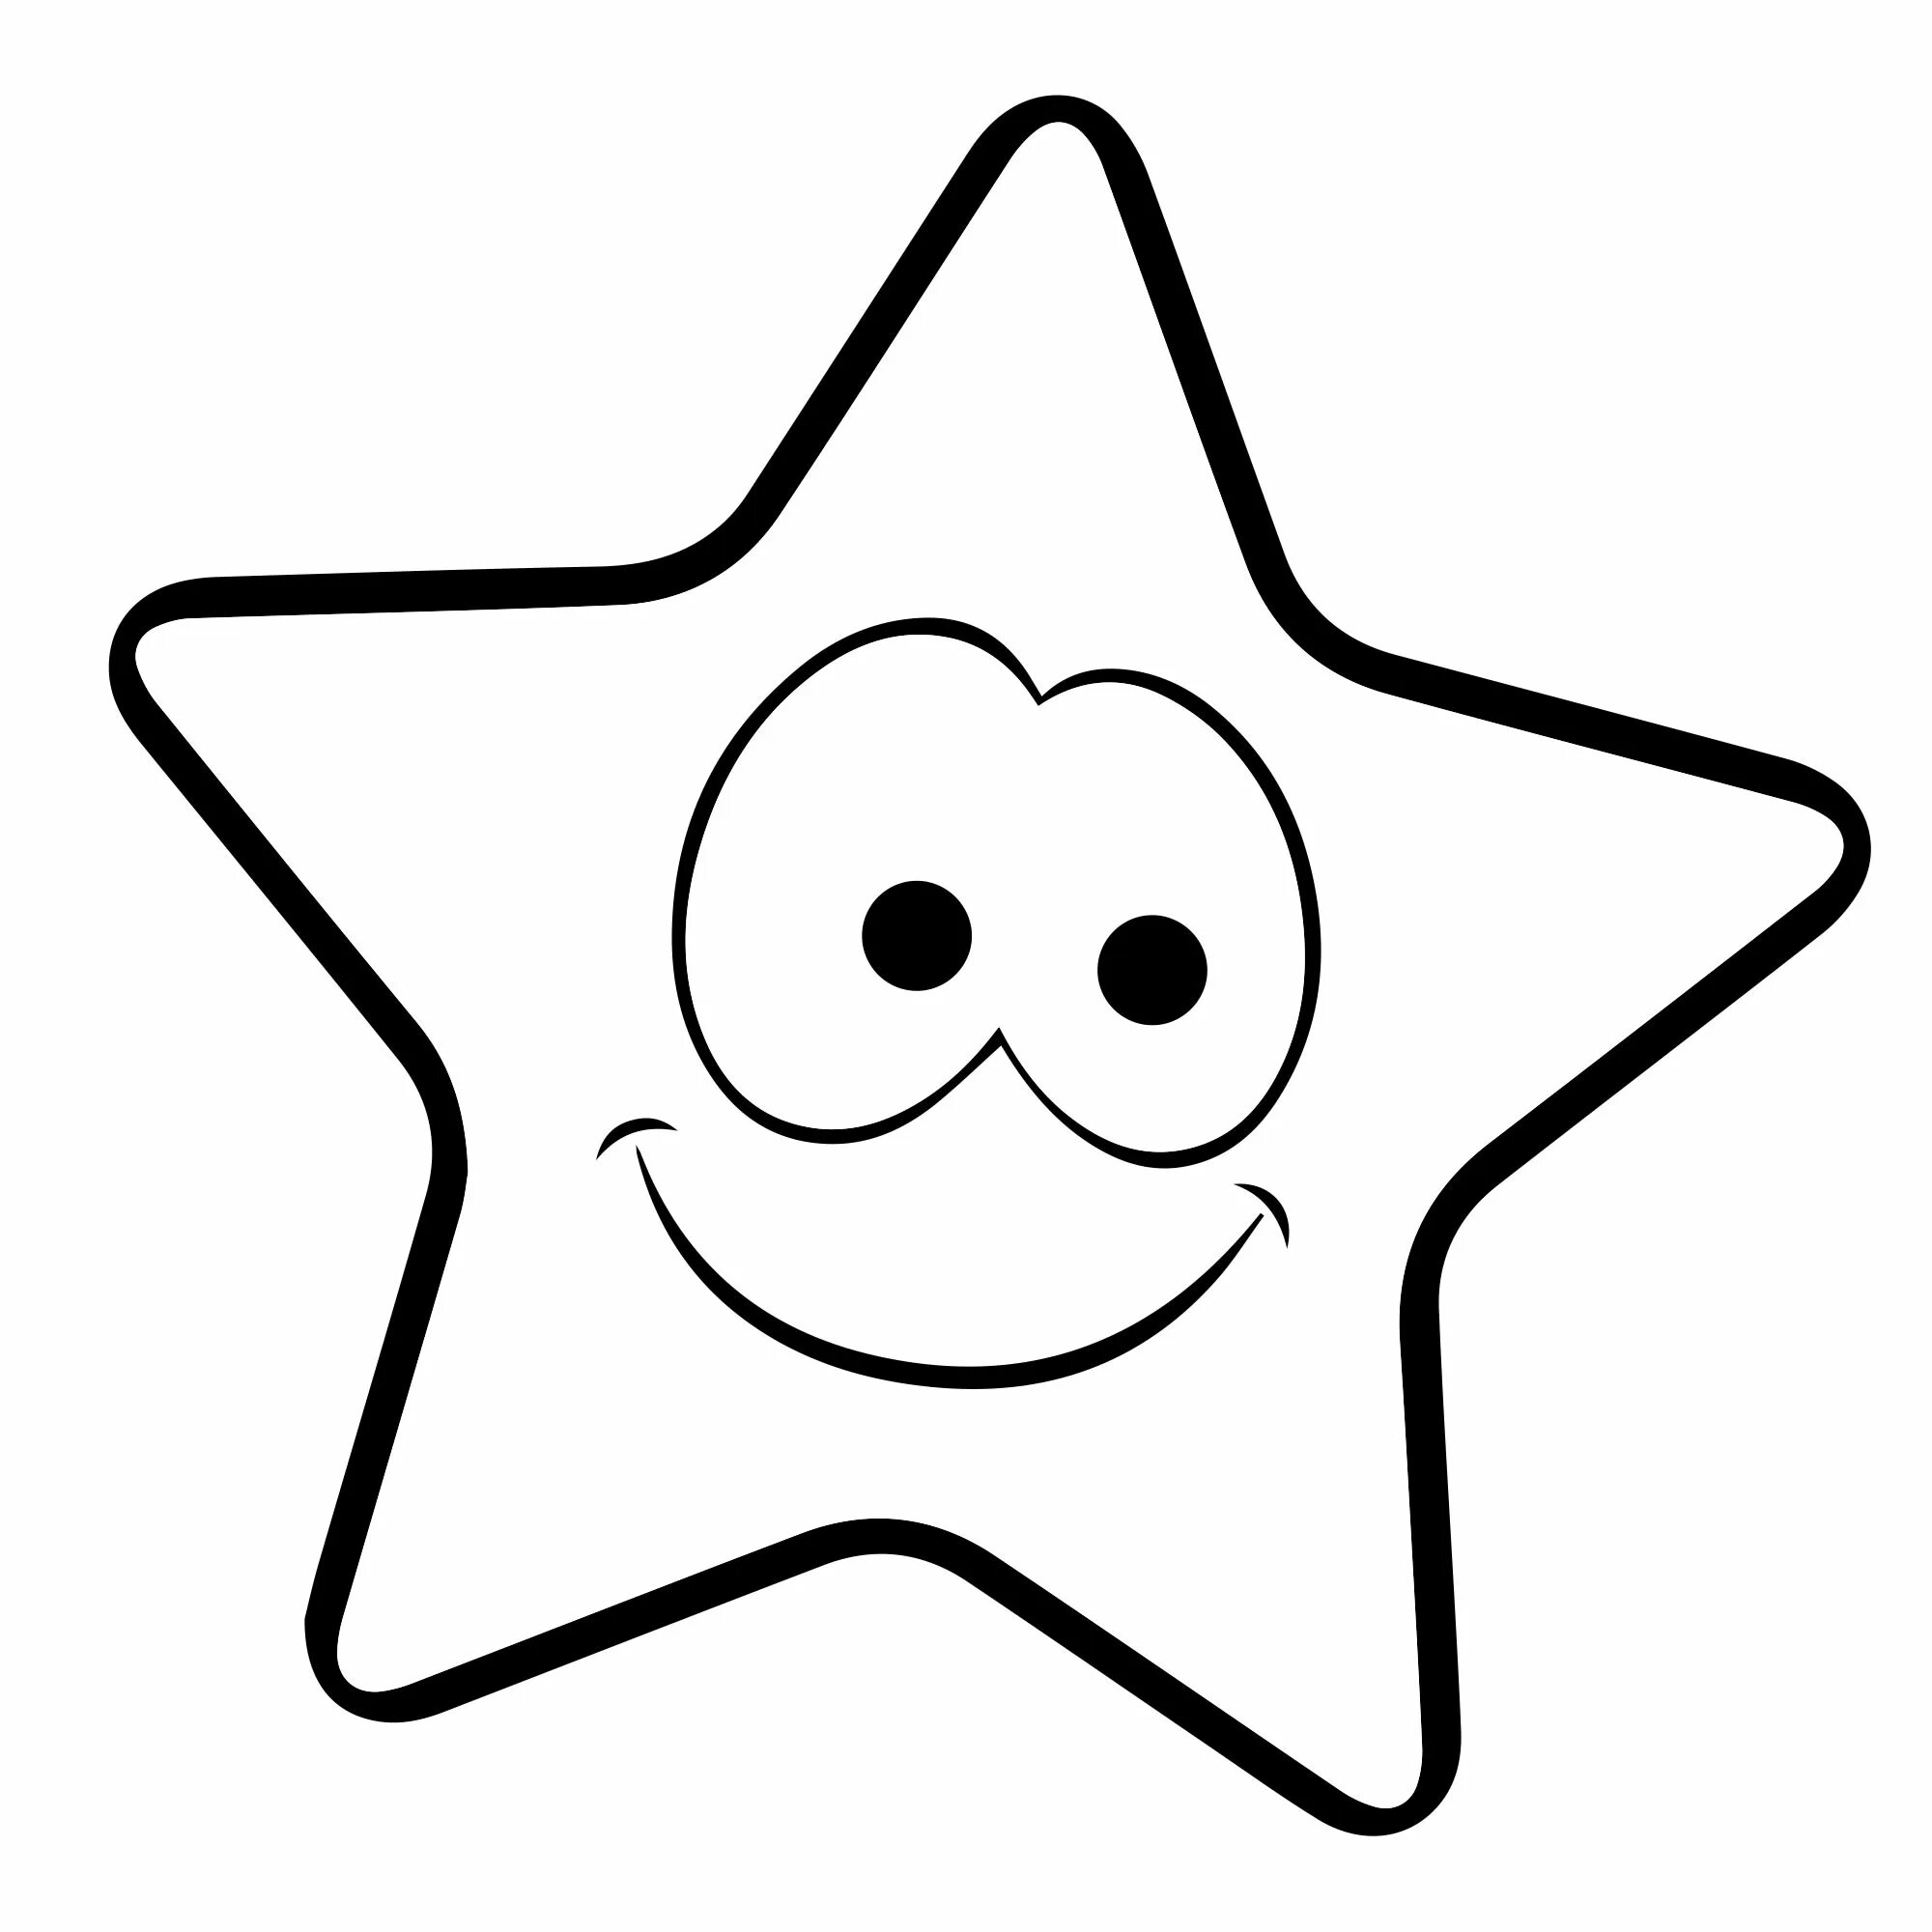 Beautiful star coloring page for kids